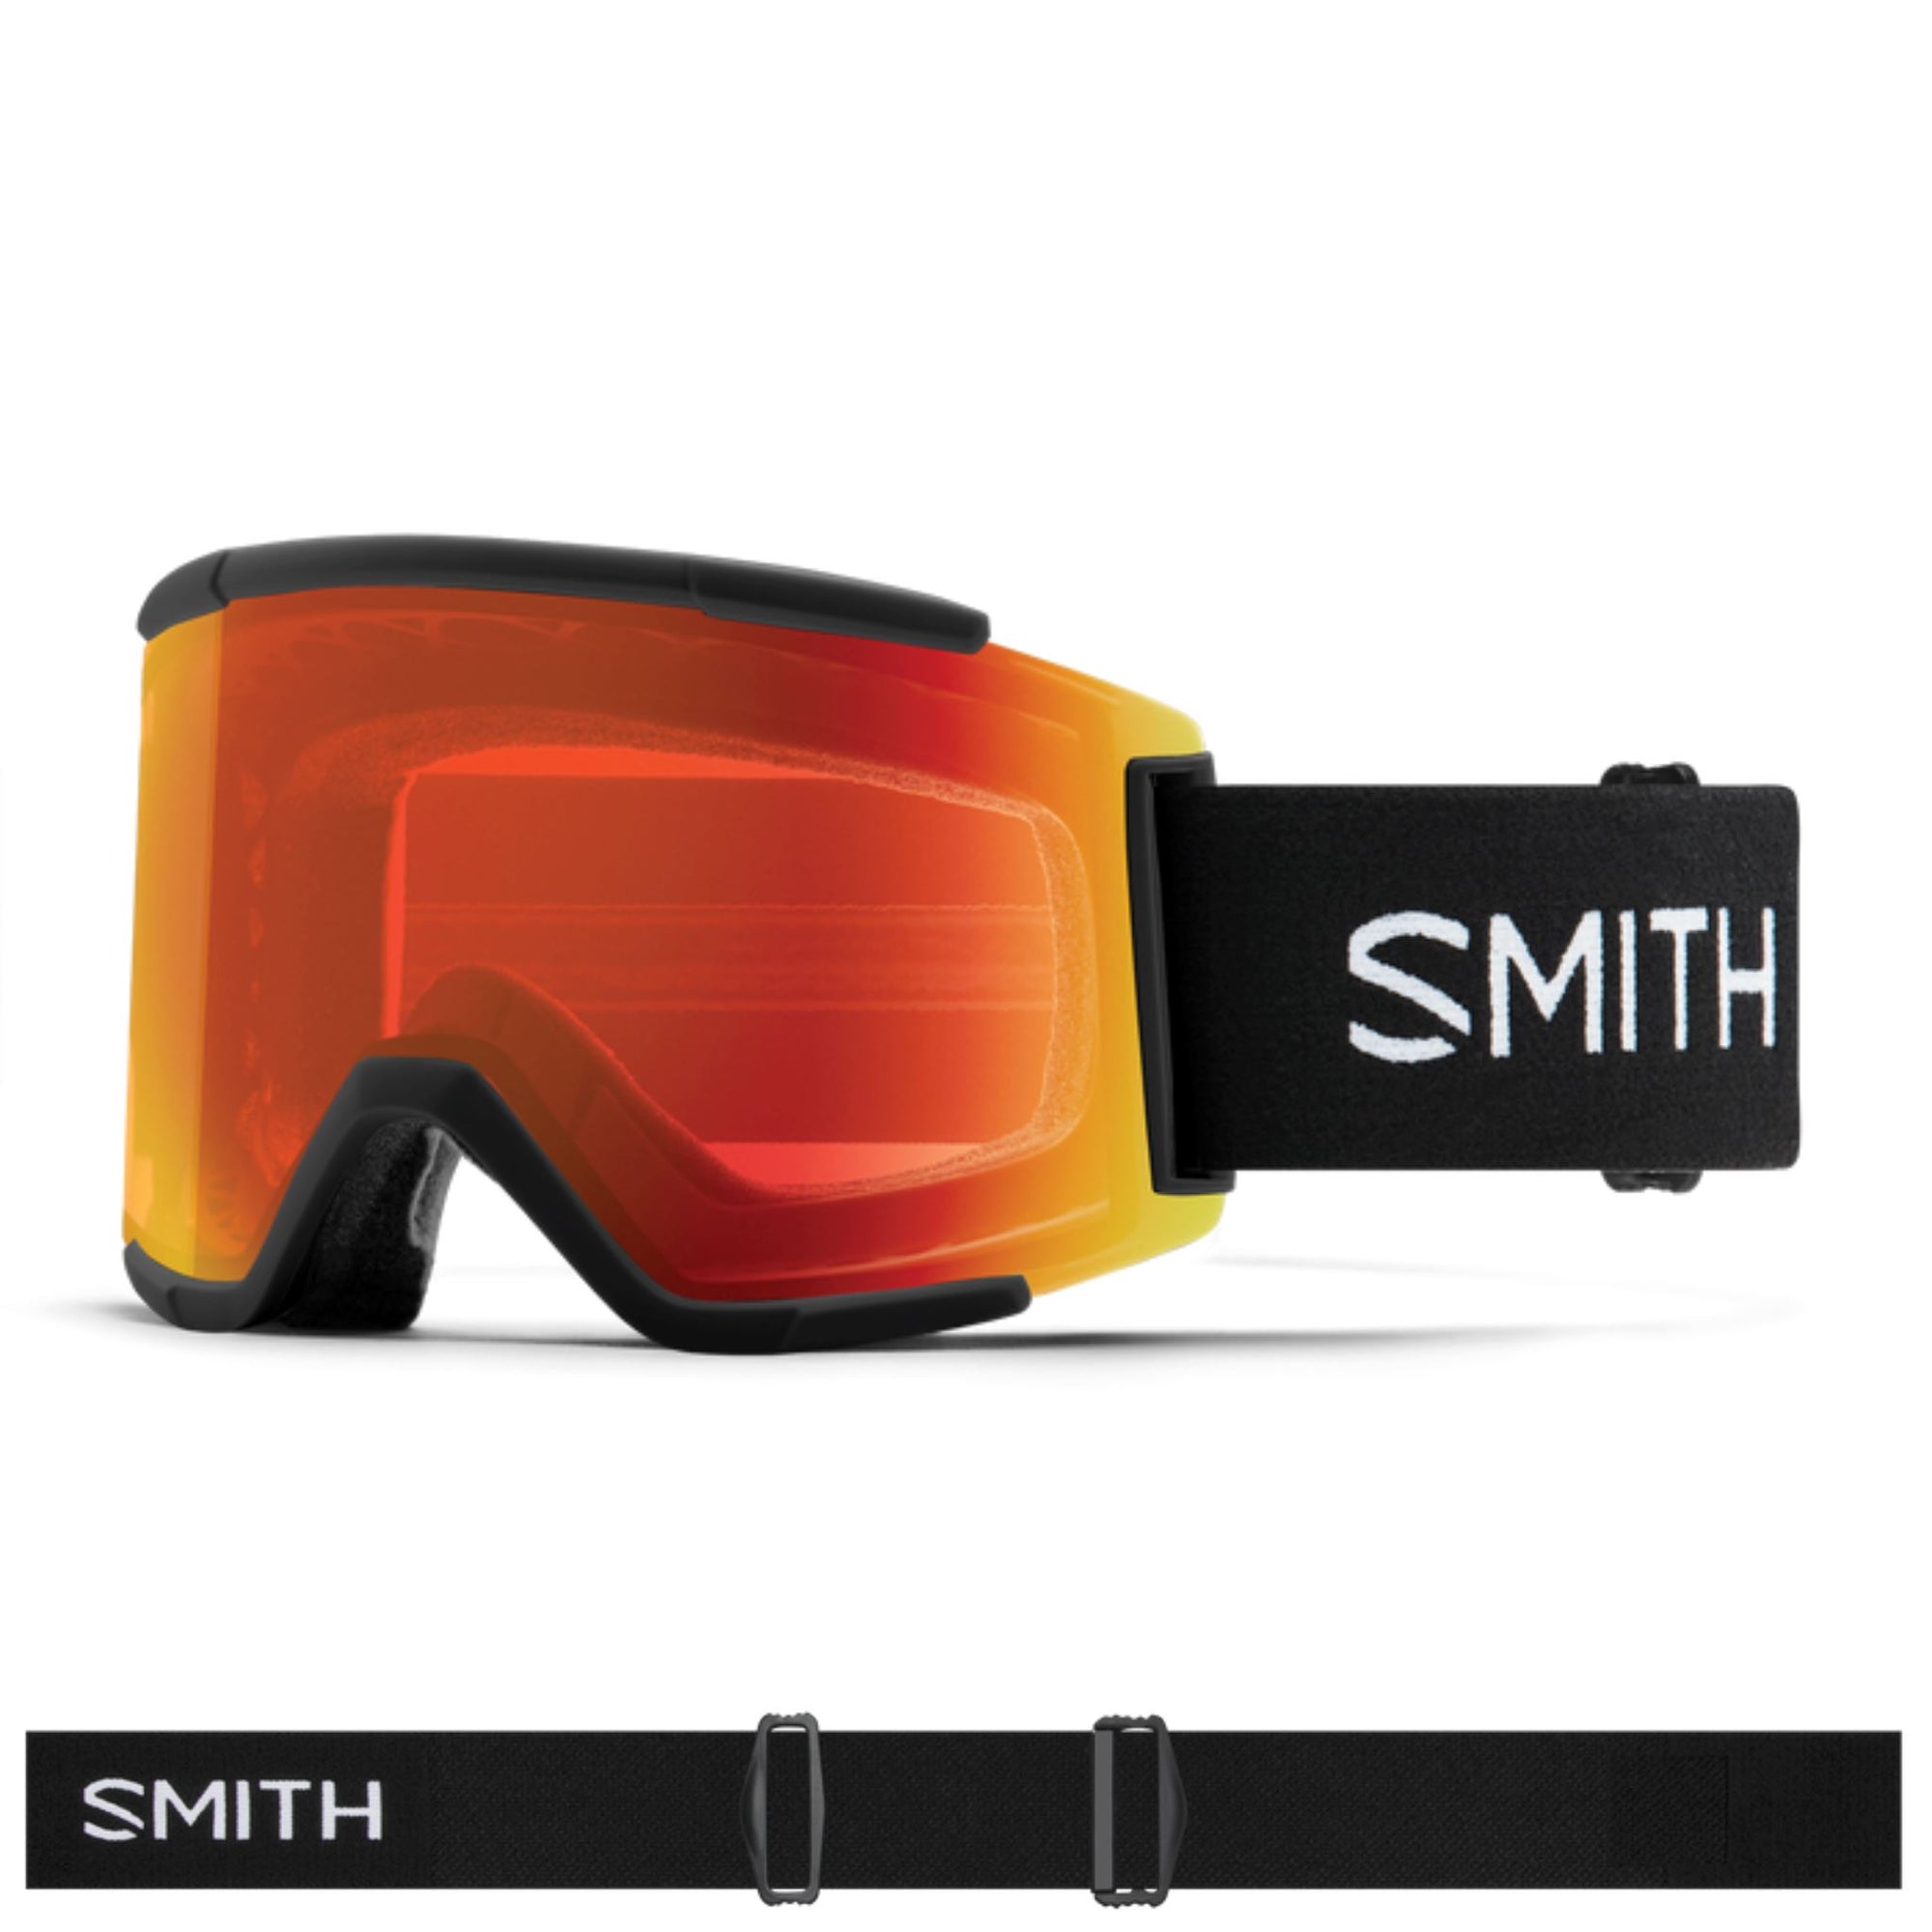 Smith Squad XL (Large Fit) Goggles - Black ChromaPop Everyday Red Mirror Goggles Smith 